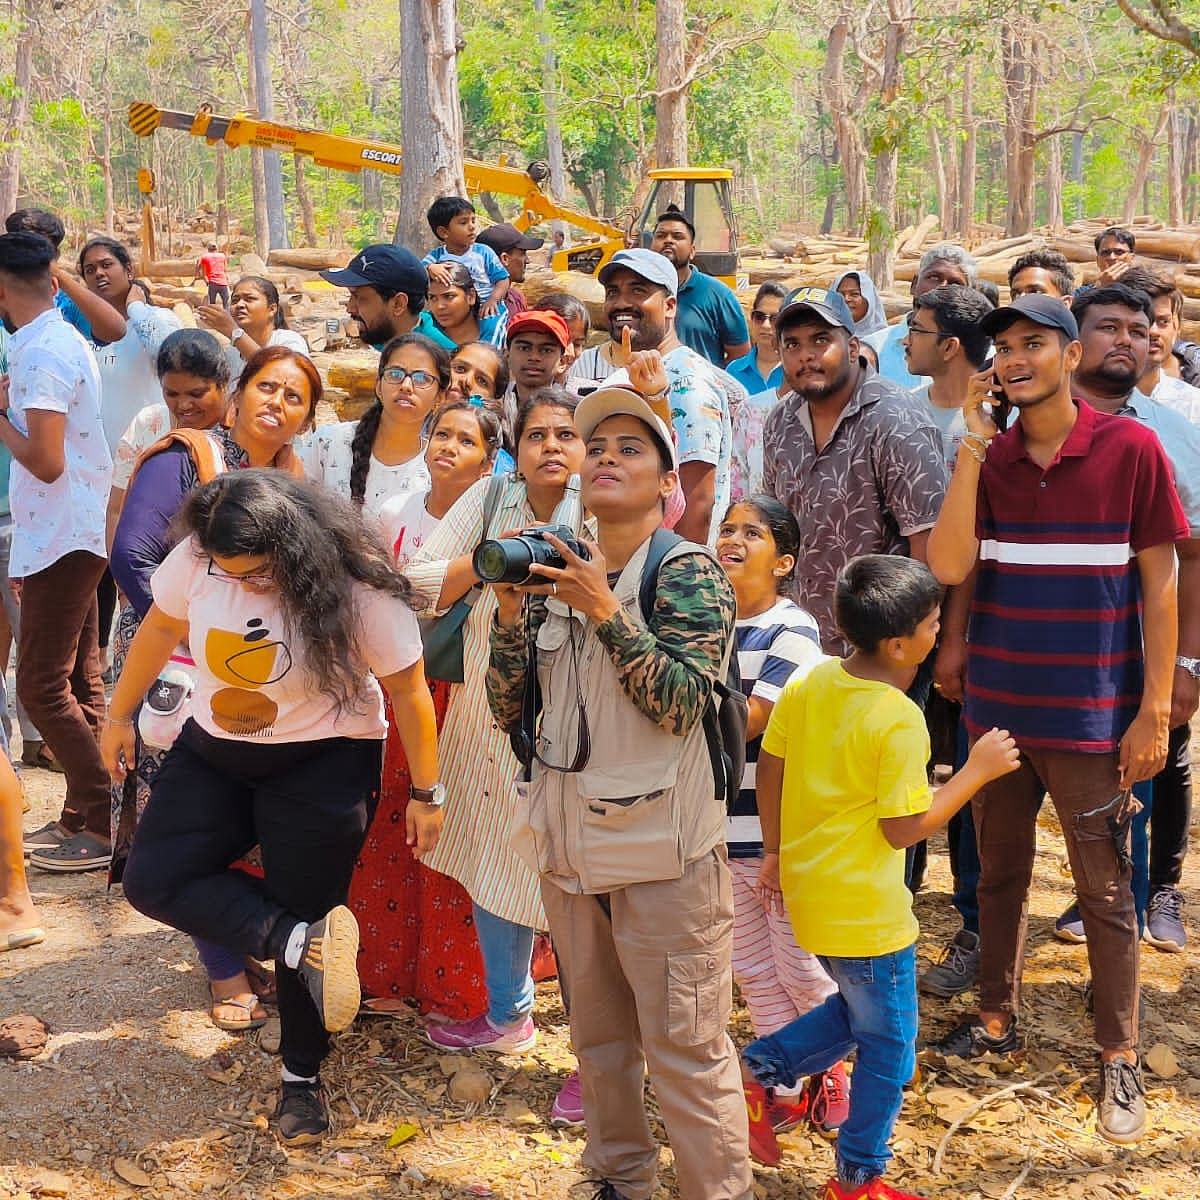 Rajani interacts with a group of visitors in Dandeli.